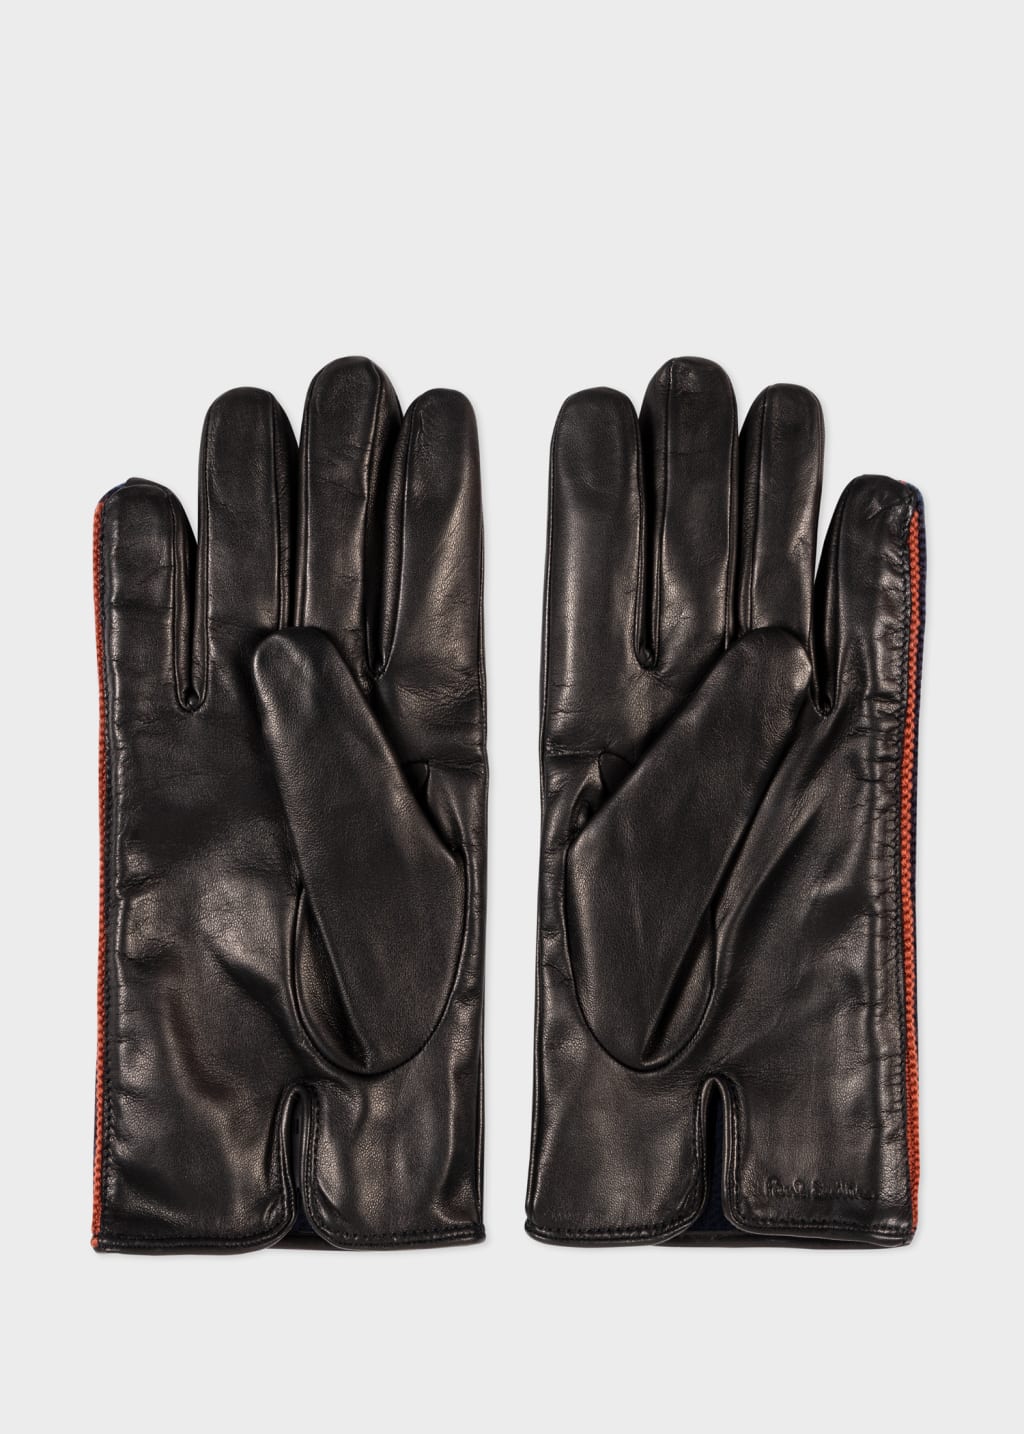 Back View - Black Leather Gloves With Knitted 'Artist Stripe' Trim Paul Smith